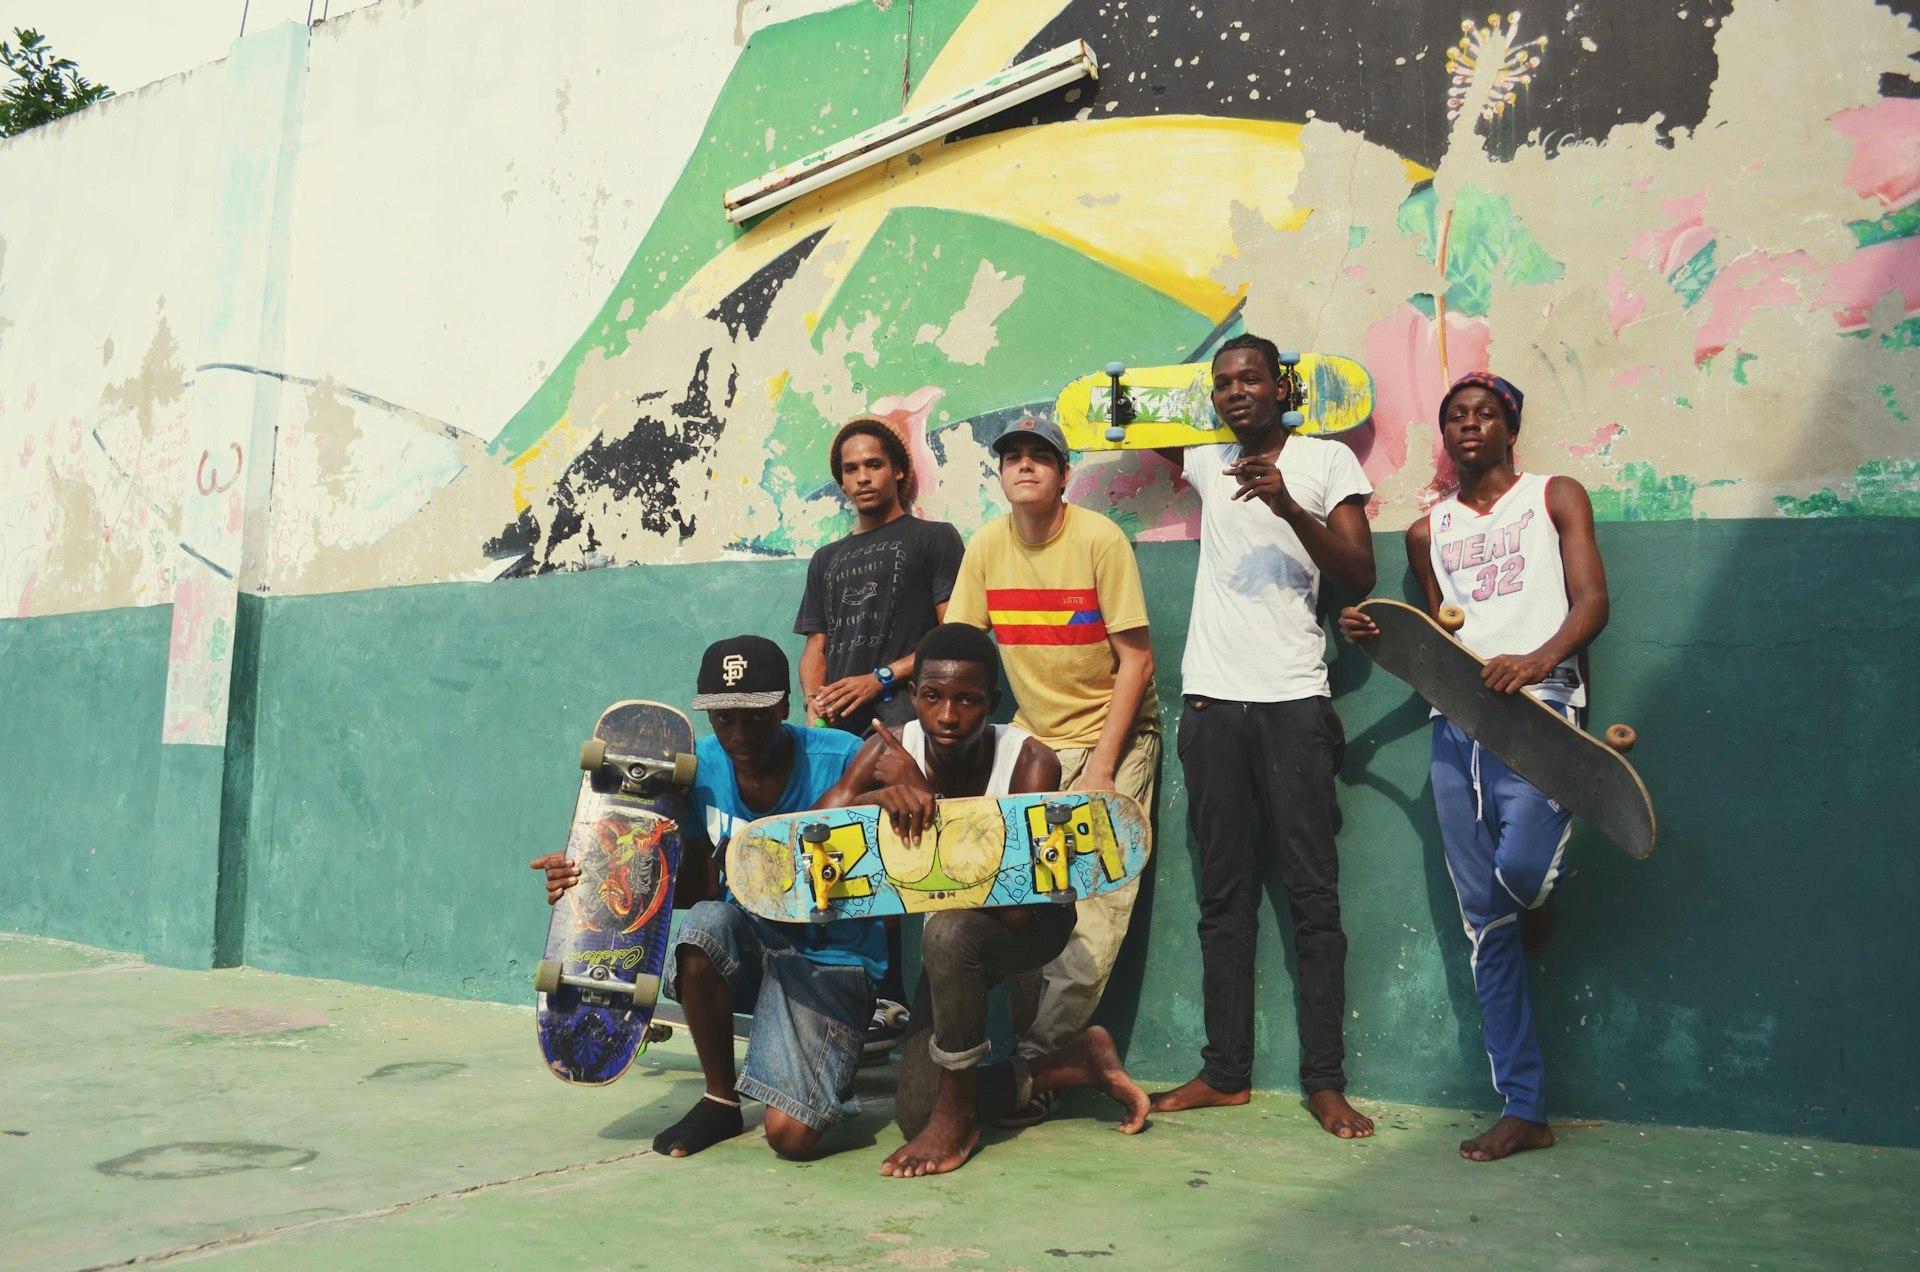 Jamaica desperately needs more skate parks – here’s why